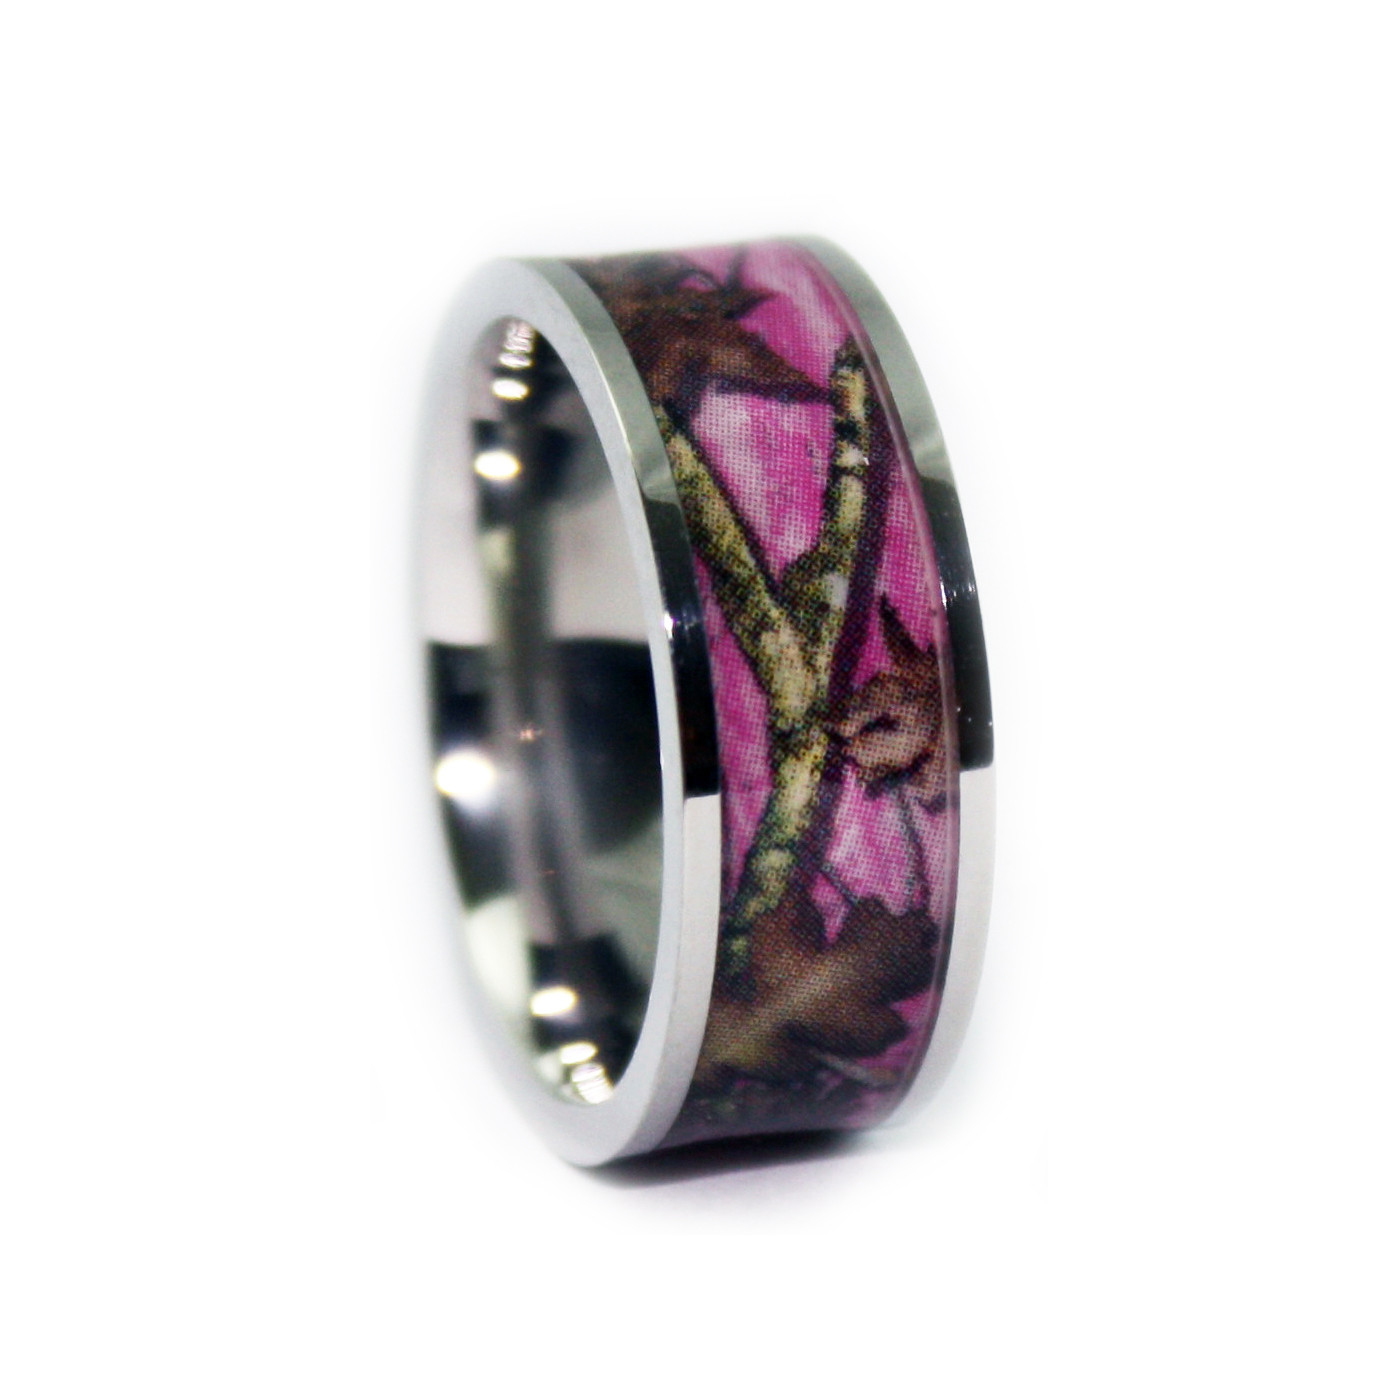 Pink Camouflage Wedding Rings
 Pink Camo Wedding Rings Flat Titanium Camouflage Band by